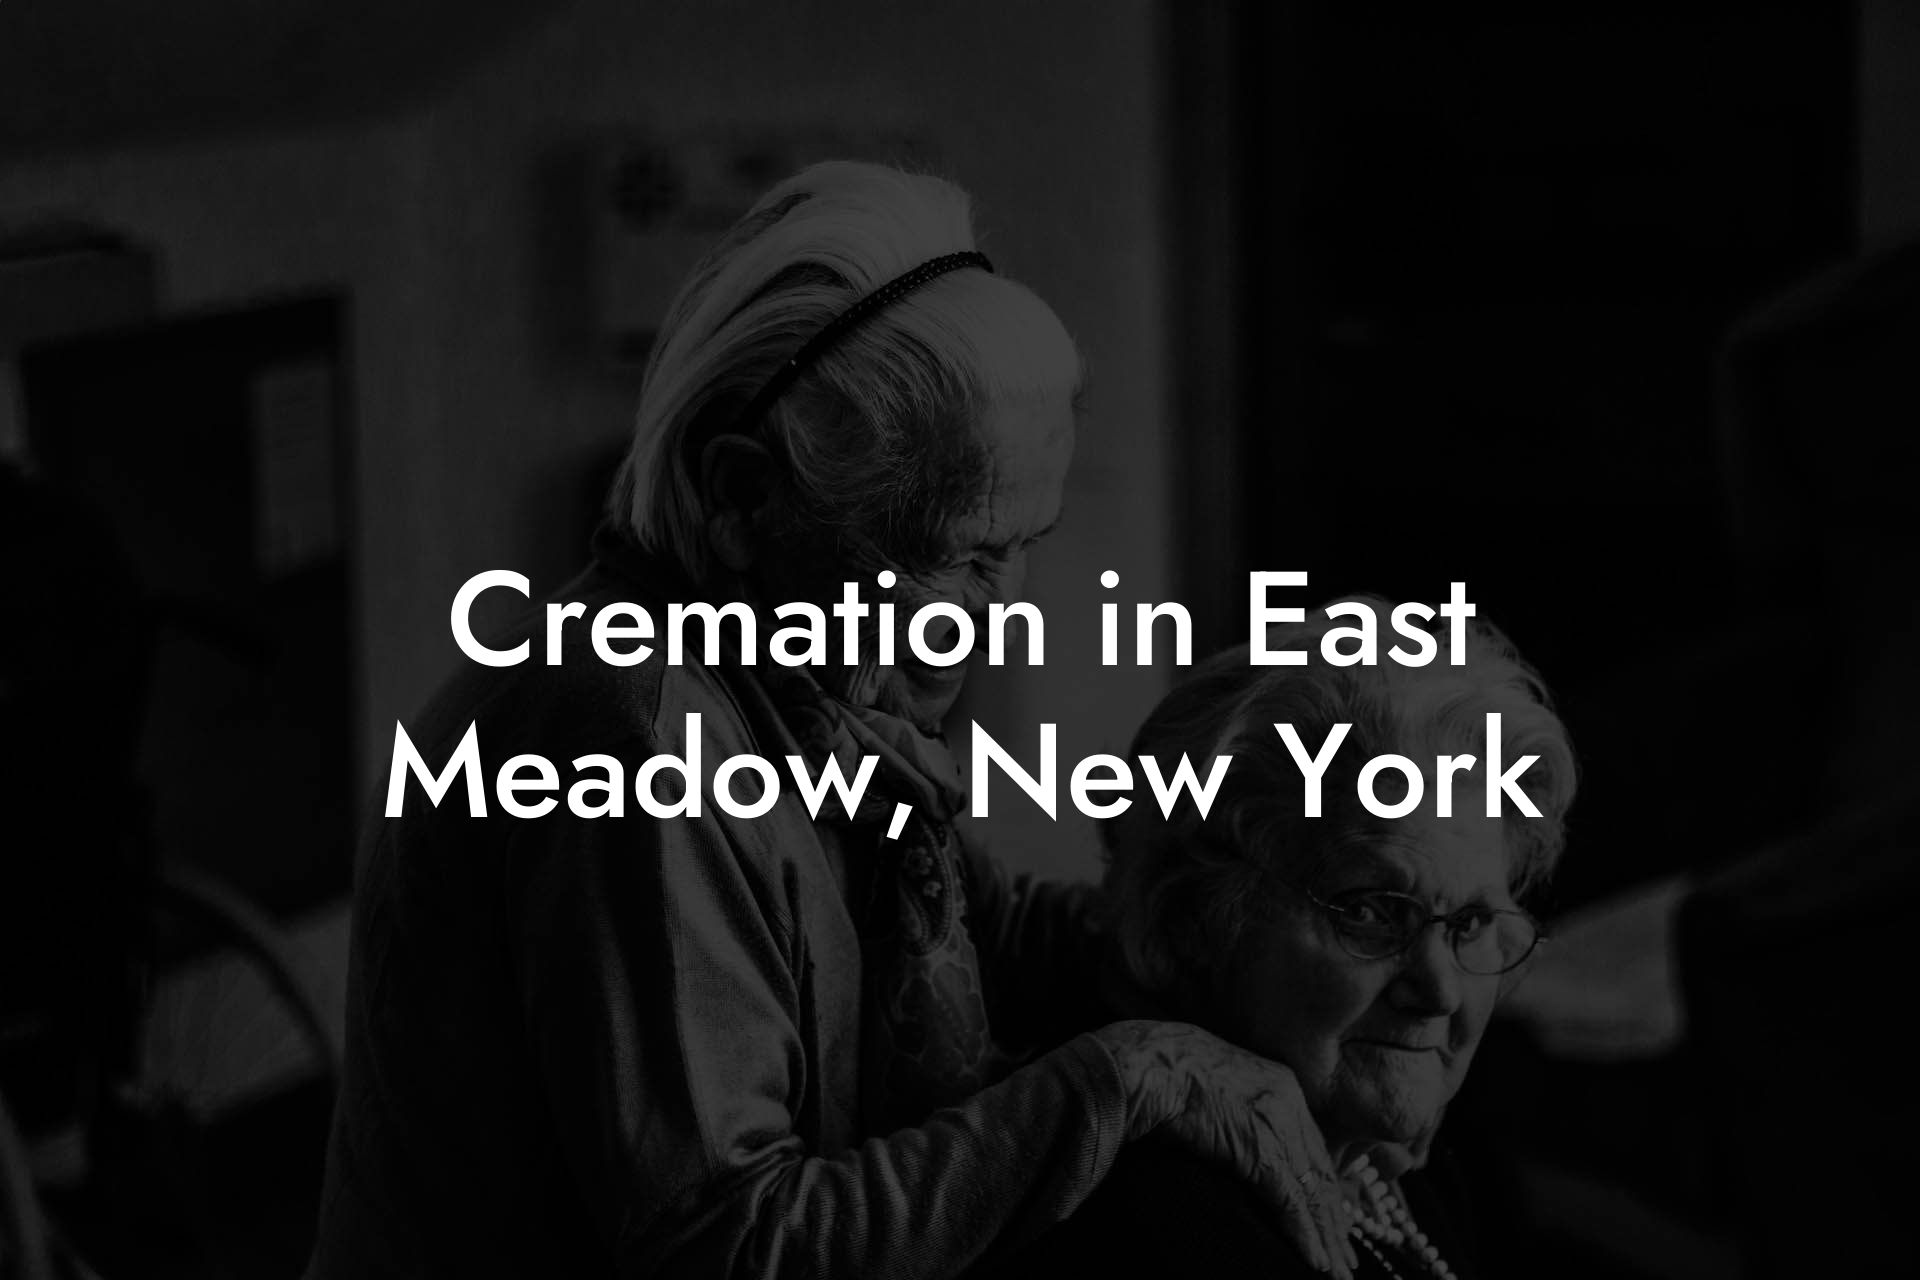 Cremation in East Meadow, New York